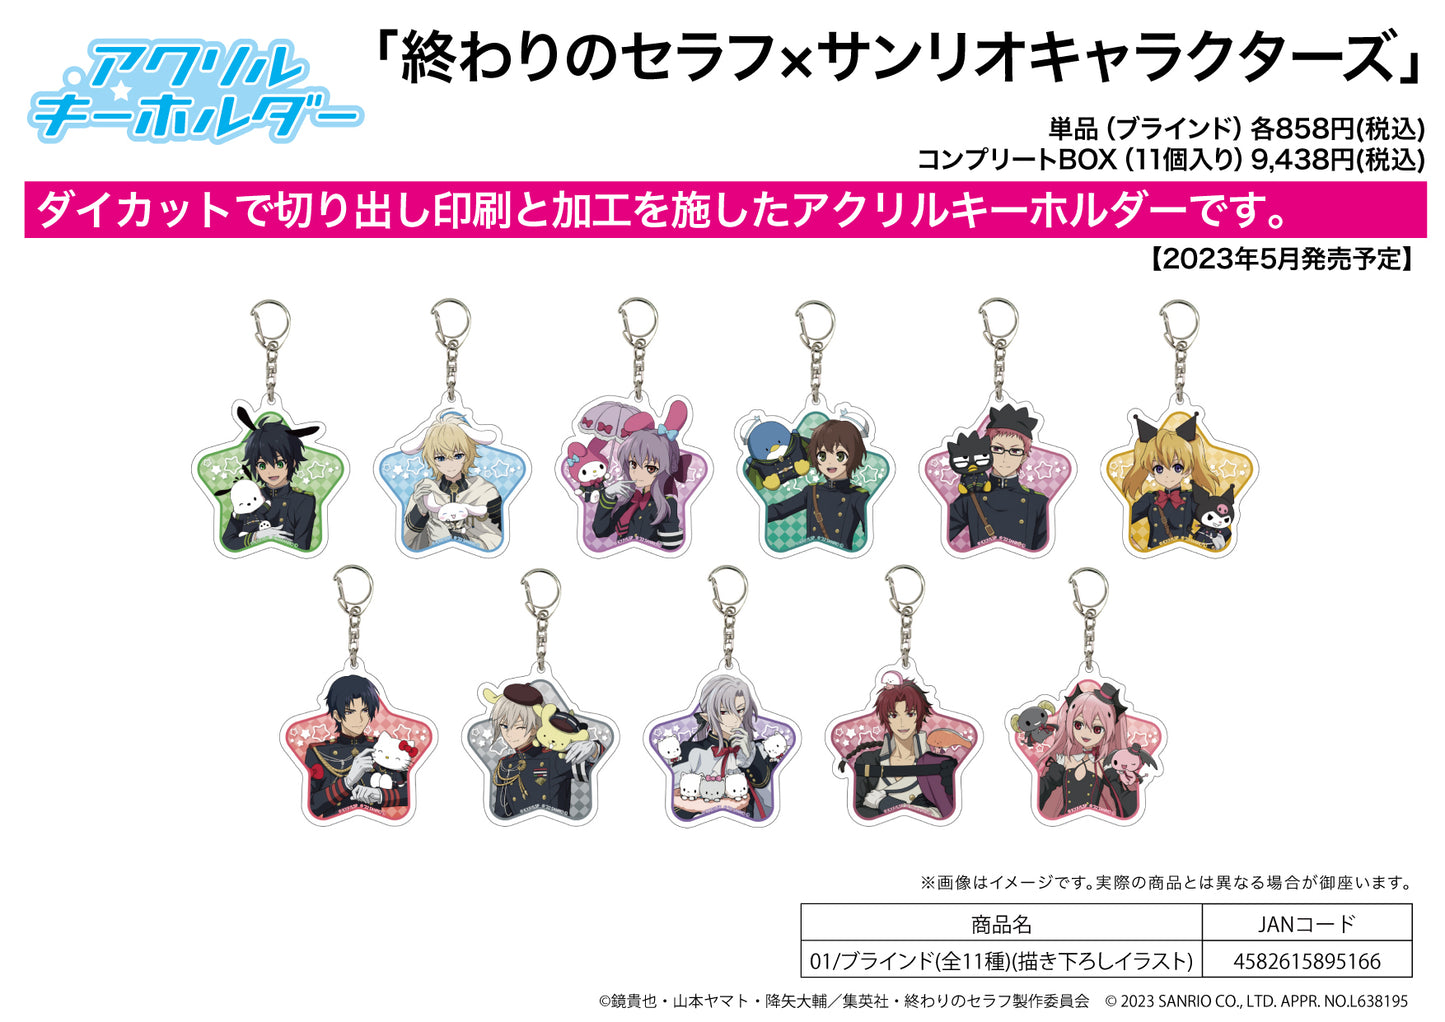 Acrylic Key Chain "Seraph of the End" x Sanrio Characters 01 Original Illustration